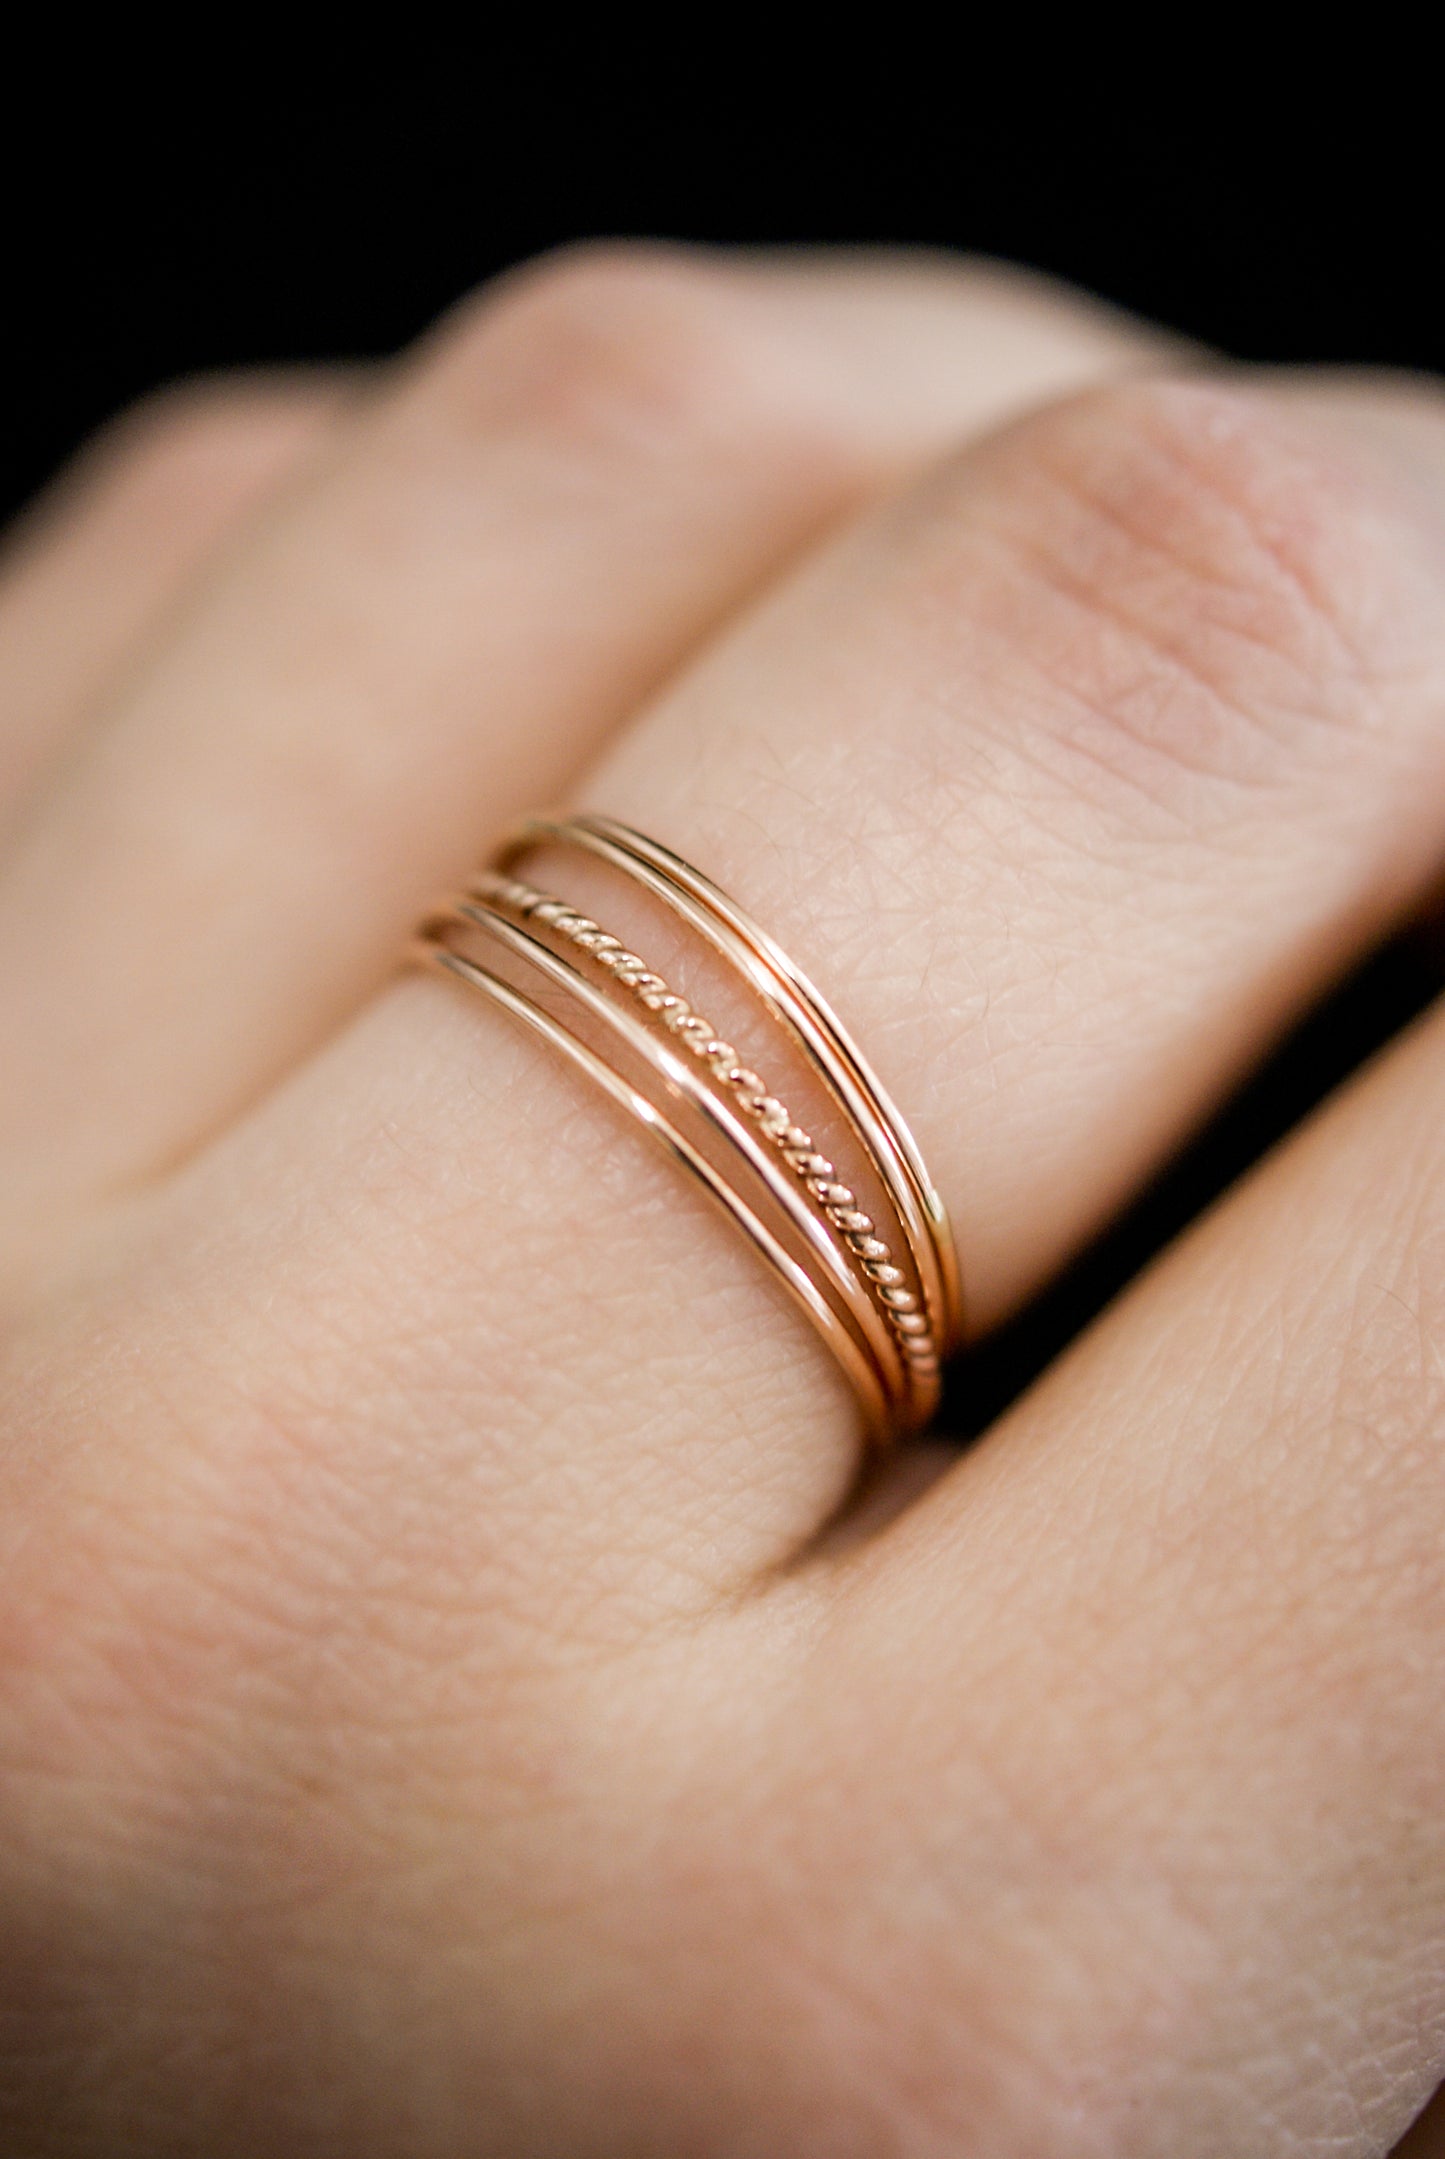 Ultra Thin Twist Set of 5 Stacking Rings, Gold Fill, Rose Gold Fill or Sterling Silver